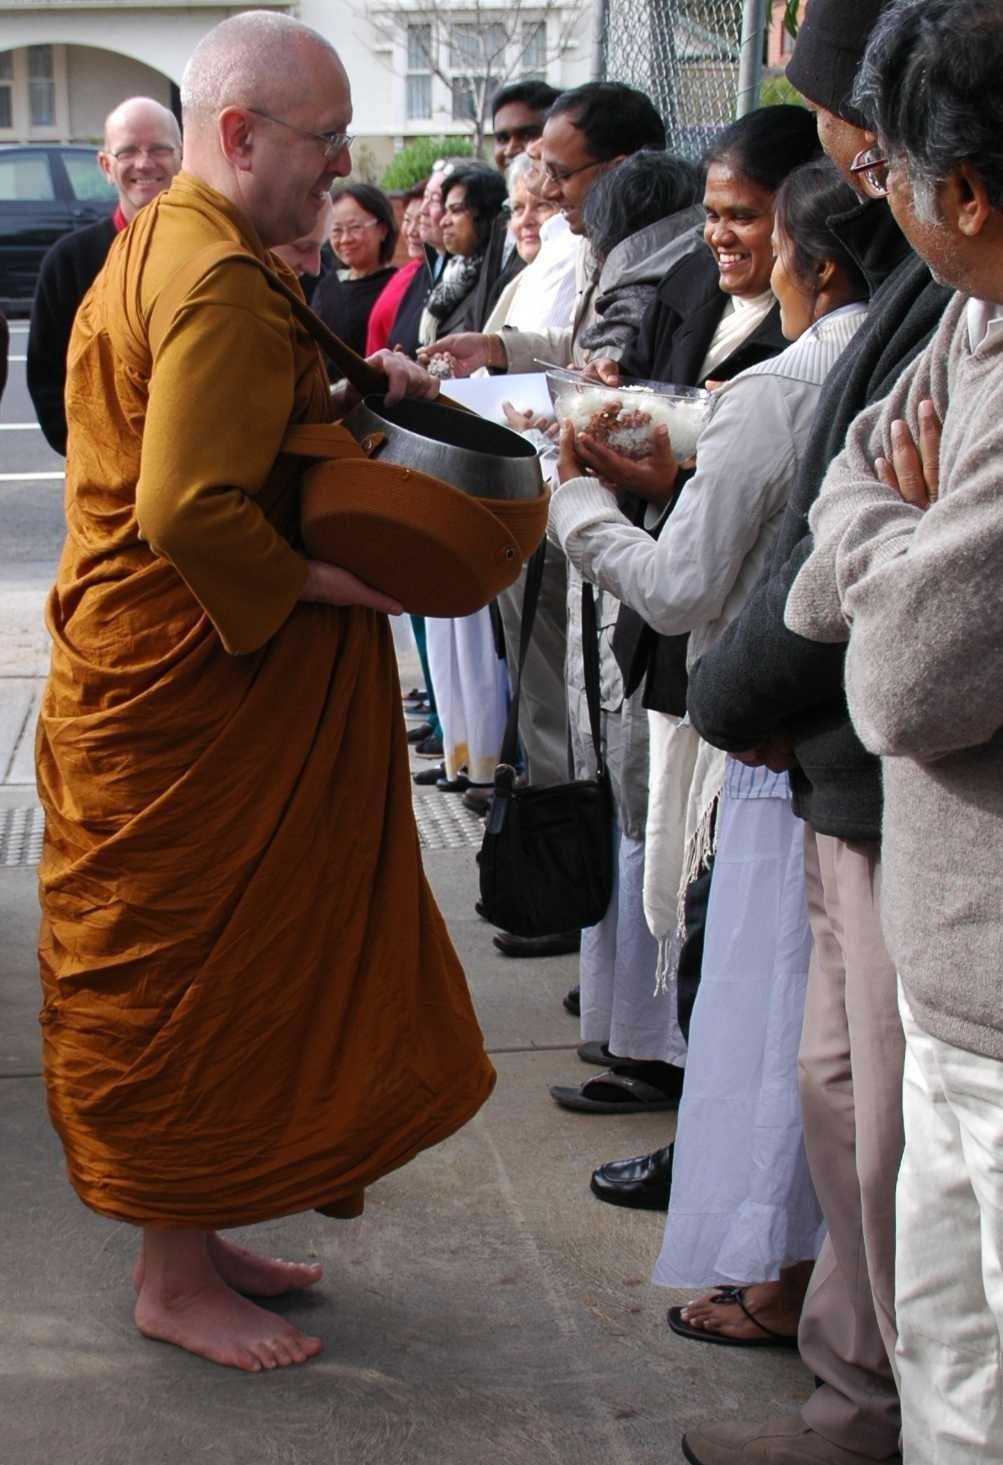 11 In-House Day Retreats conducted by Ajahn Brahmavamso Program - Monday 17 th May 2010 8:00 am - Meditation Meditation Instructions Short Break Questions Discussion 11:00 am - Break for offering of